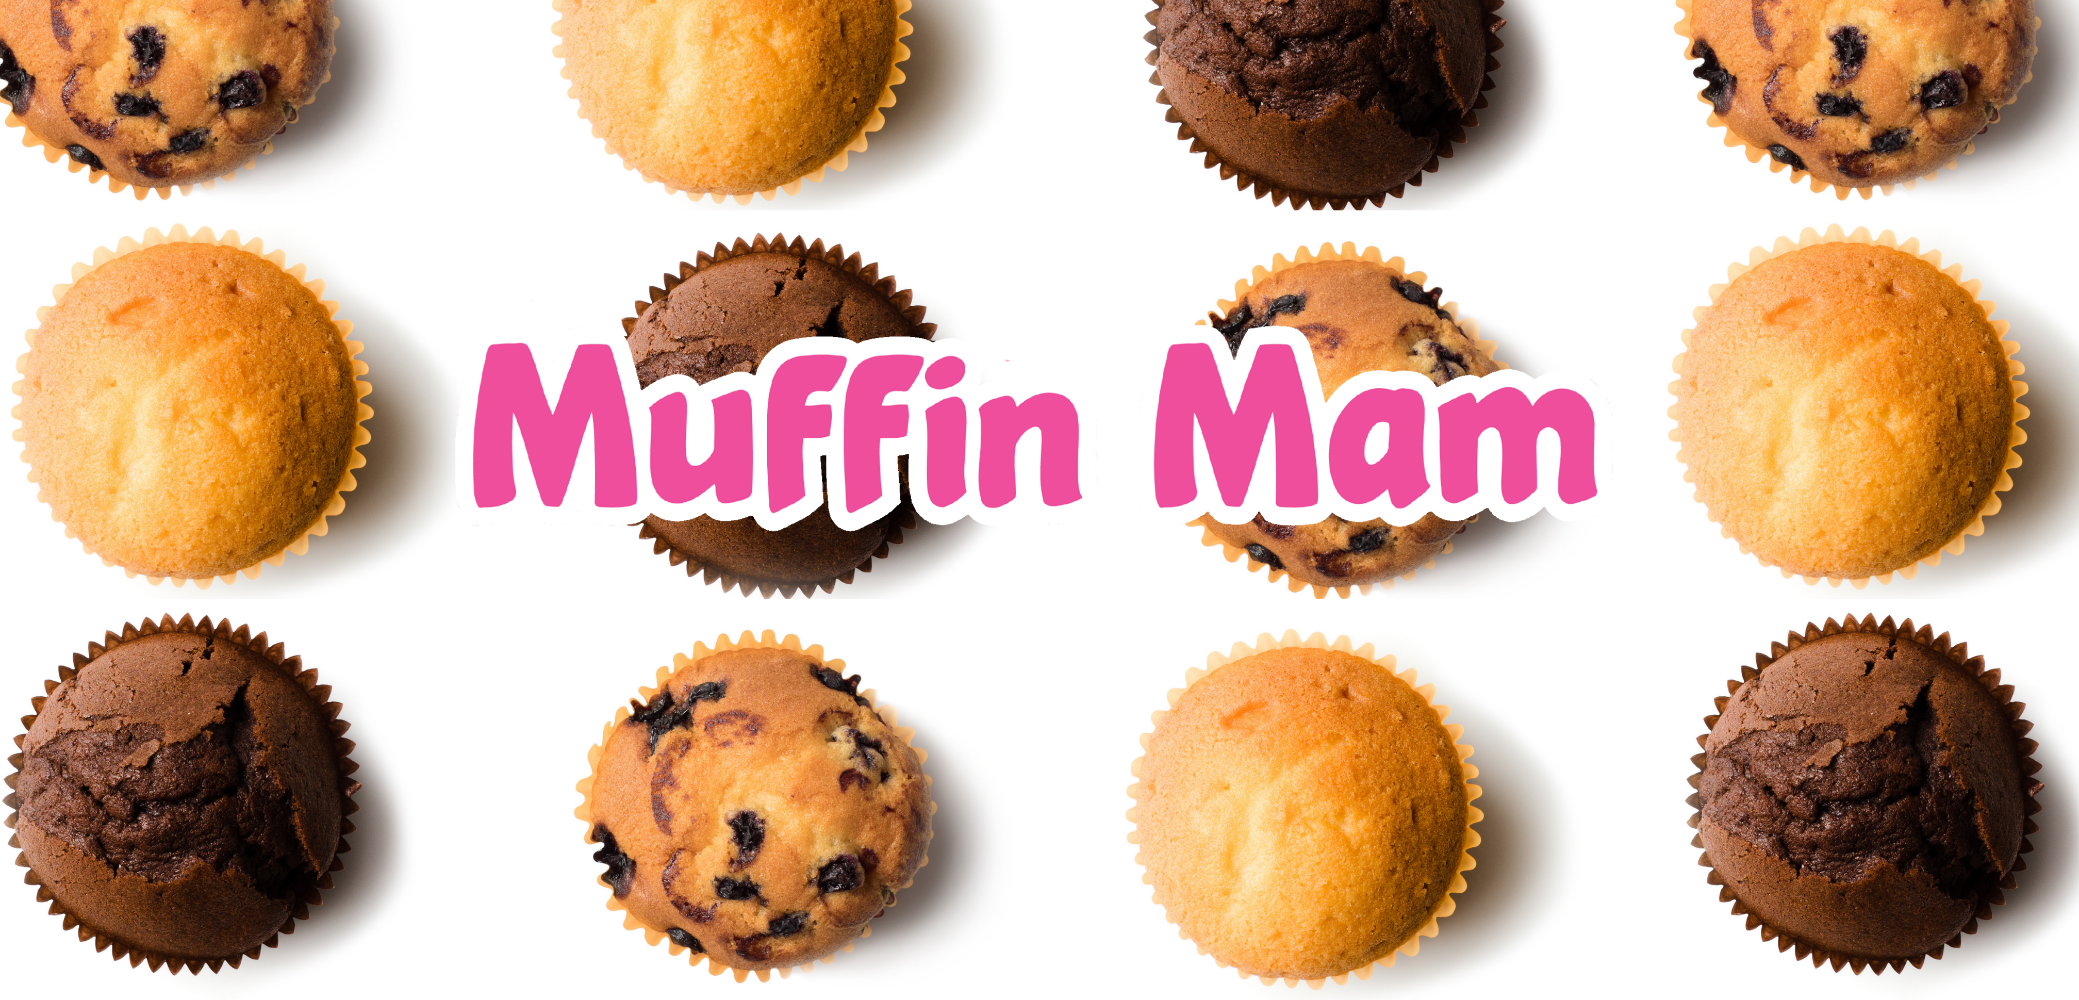 100,000 SqFt Multi-Million Dollar 2019 Muffin & Decorative Cake Plant: Equipment Assets of Muffin Mam: All High End Late Model Equipment